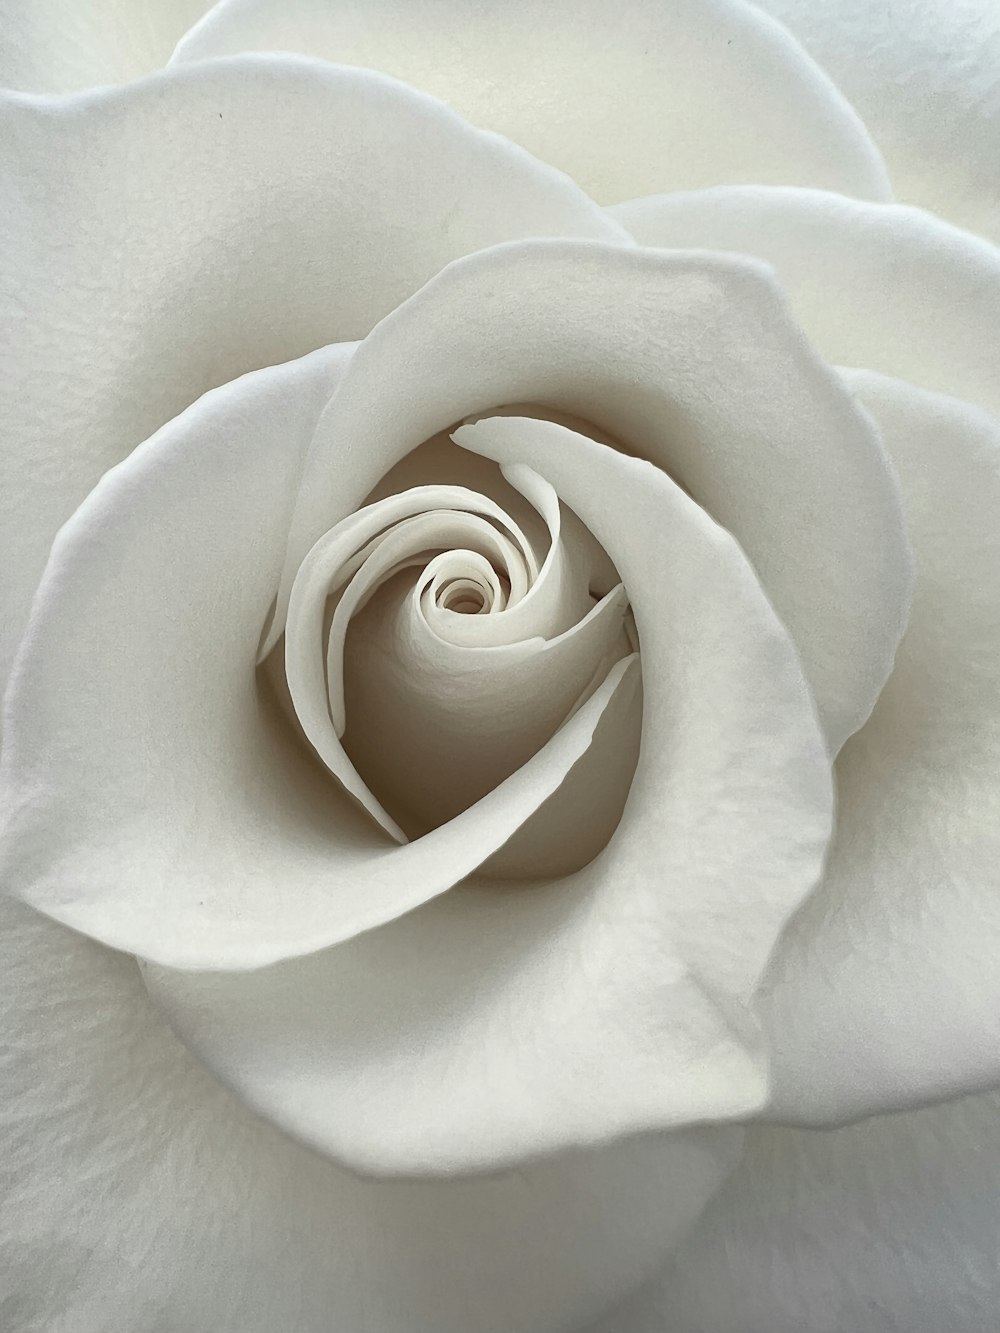 a close up of a white rose flower